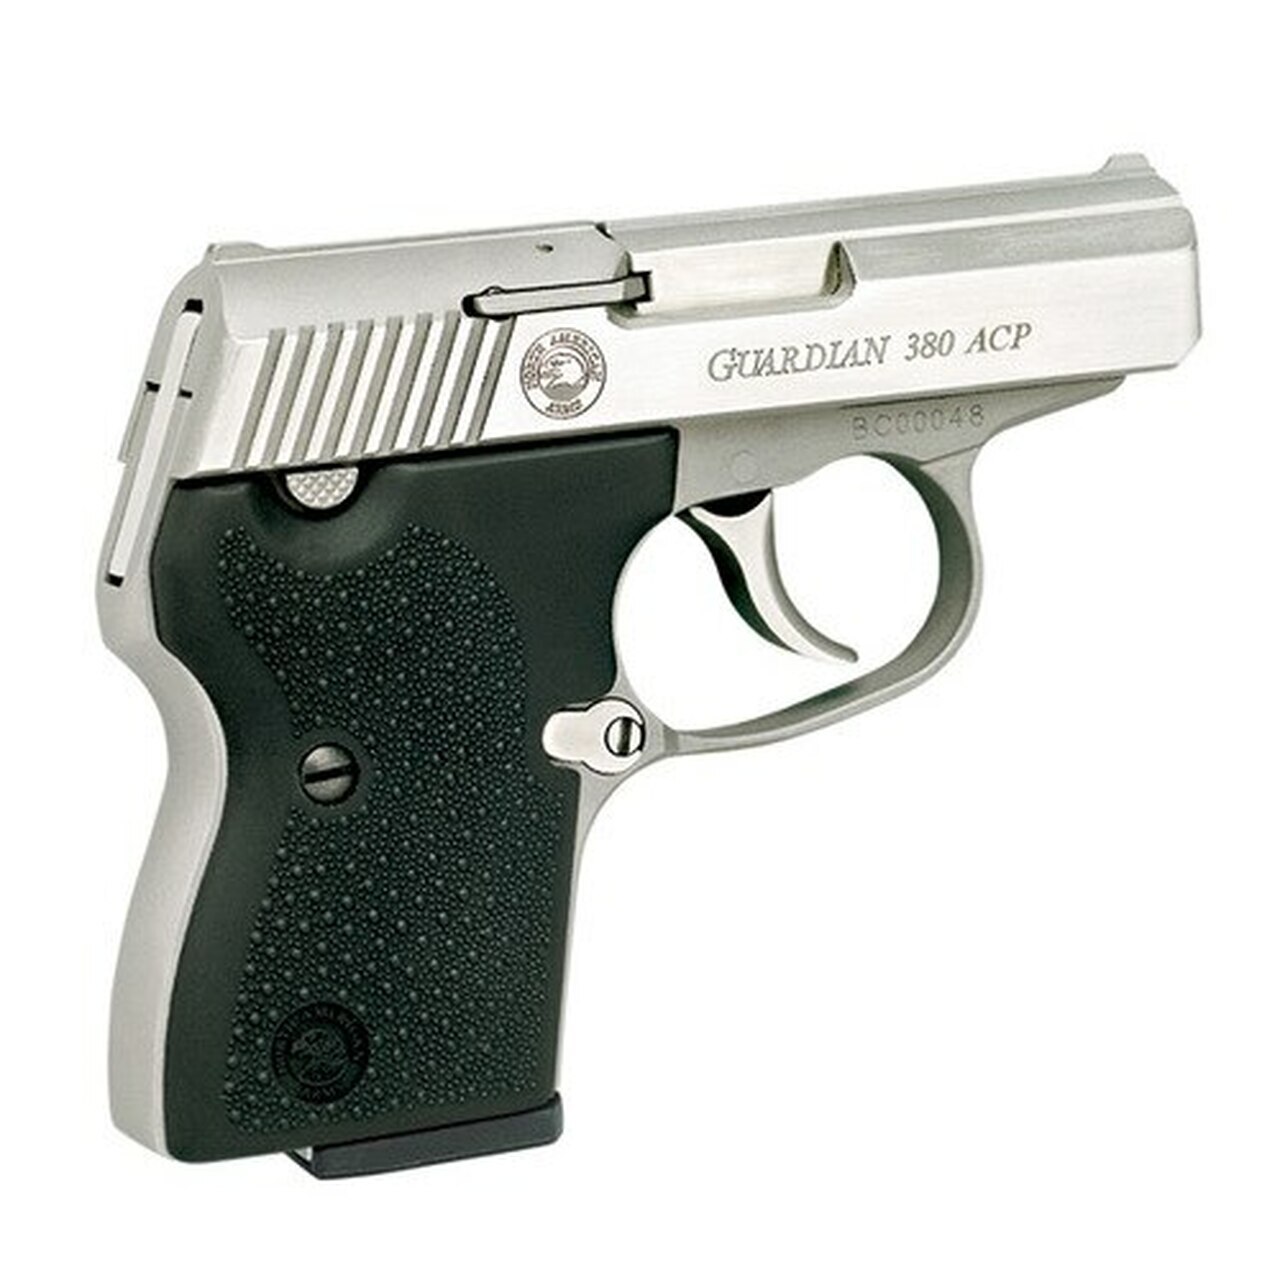 Image of NAA 380 Guardian 380 ACP, 2.5" Barrel, DAO, Black/Stainless, 6rd